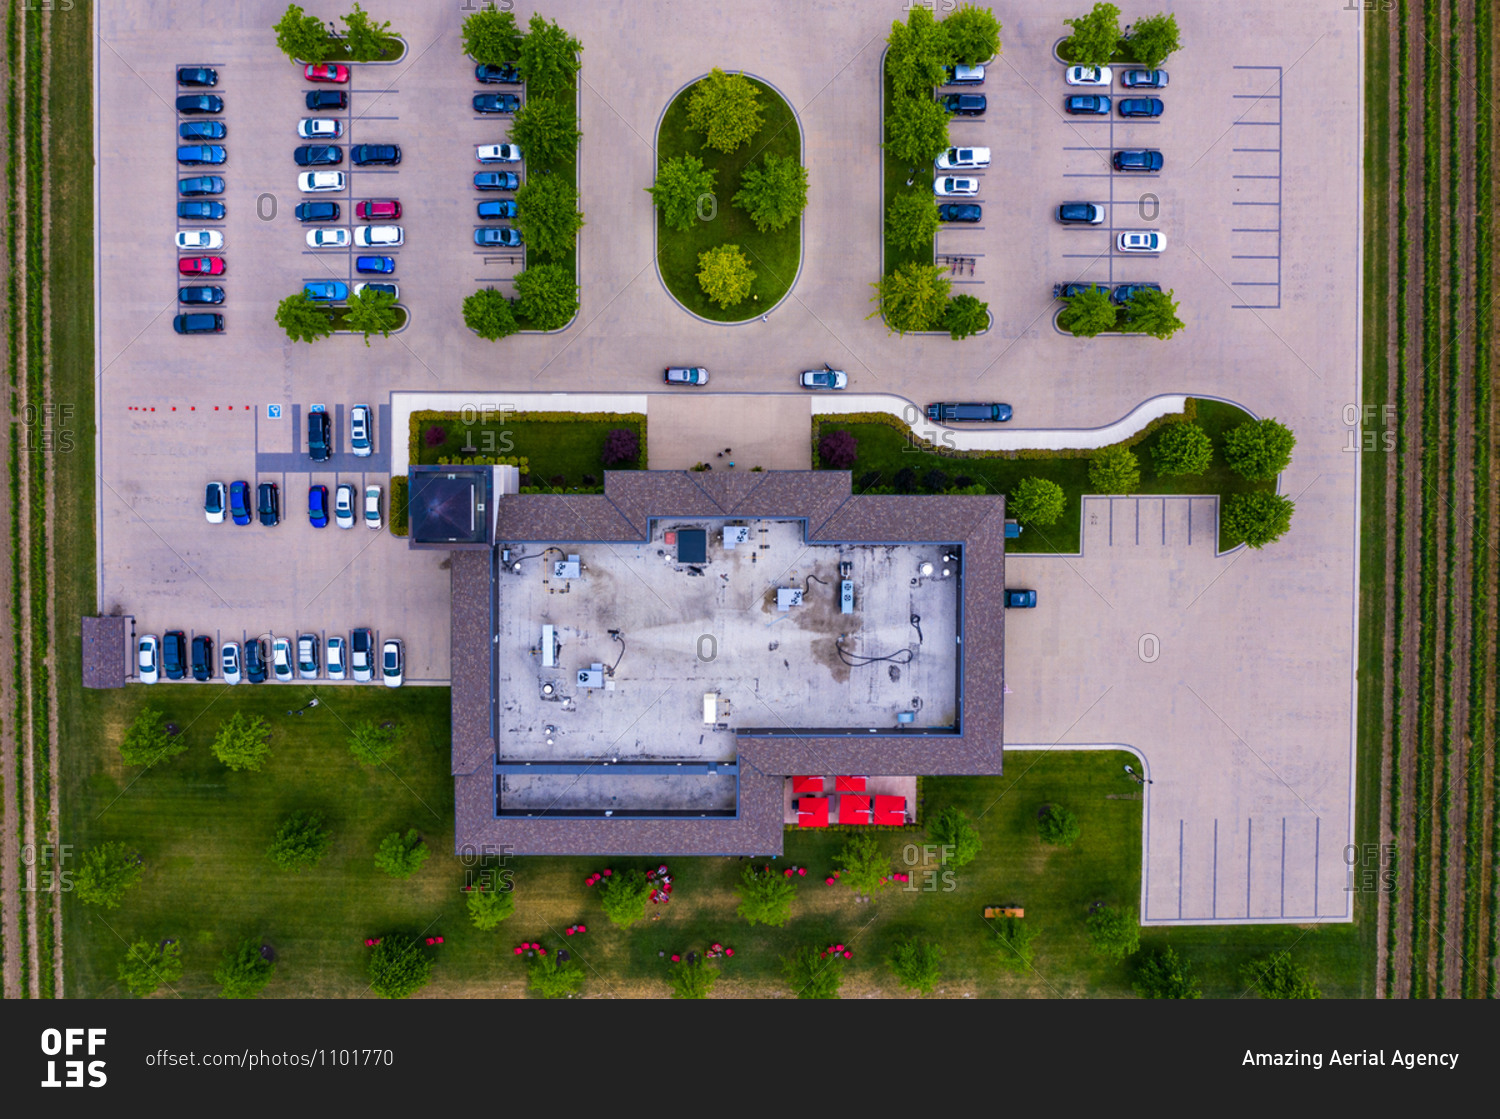 Aerial view of a small parking lot next to the vineyard near the Lake Ontario, Canada.